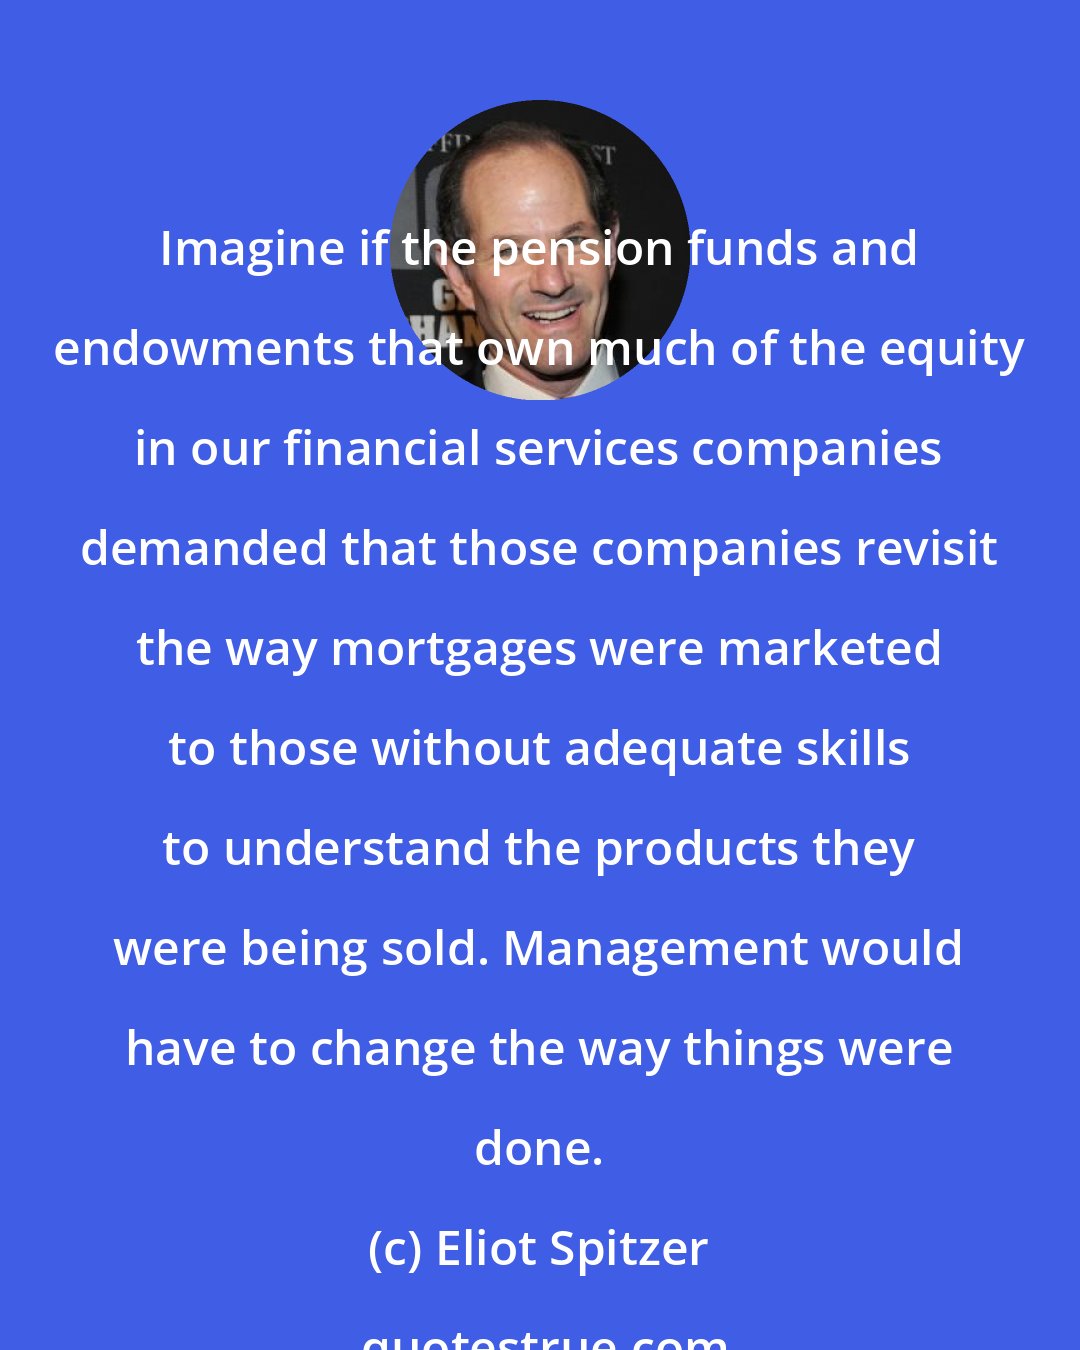 Eliot Spitzer: Imagine if the pension funds and endowments that own much of the equity in our financial services companies demanded that those companies revisit the way mortgages were marketed to those without adequate skills to understand the products they were being sold. Management would have to change the way things were done.